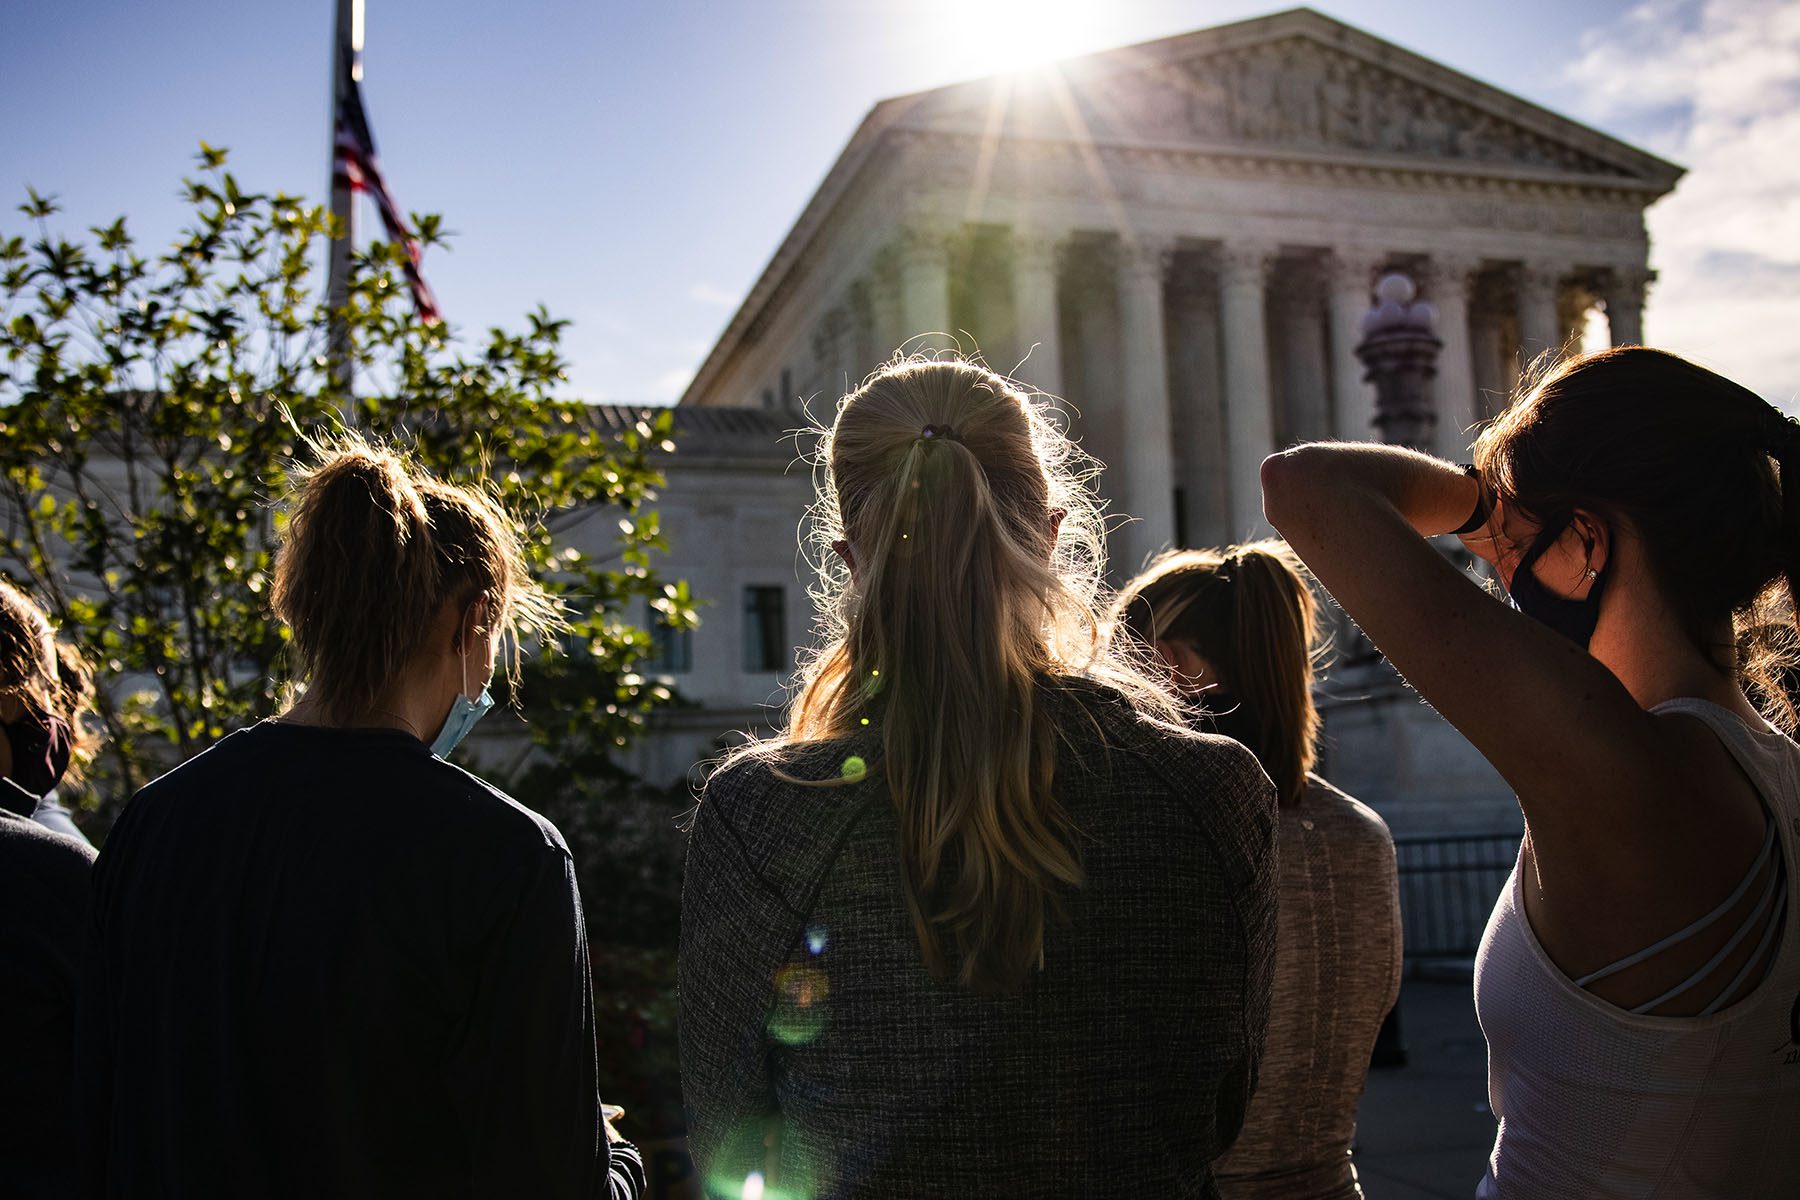 Women are seen gathering in front of the U.S. Supreme Court.